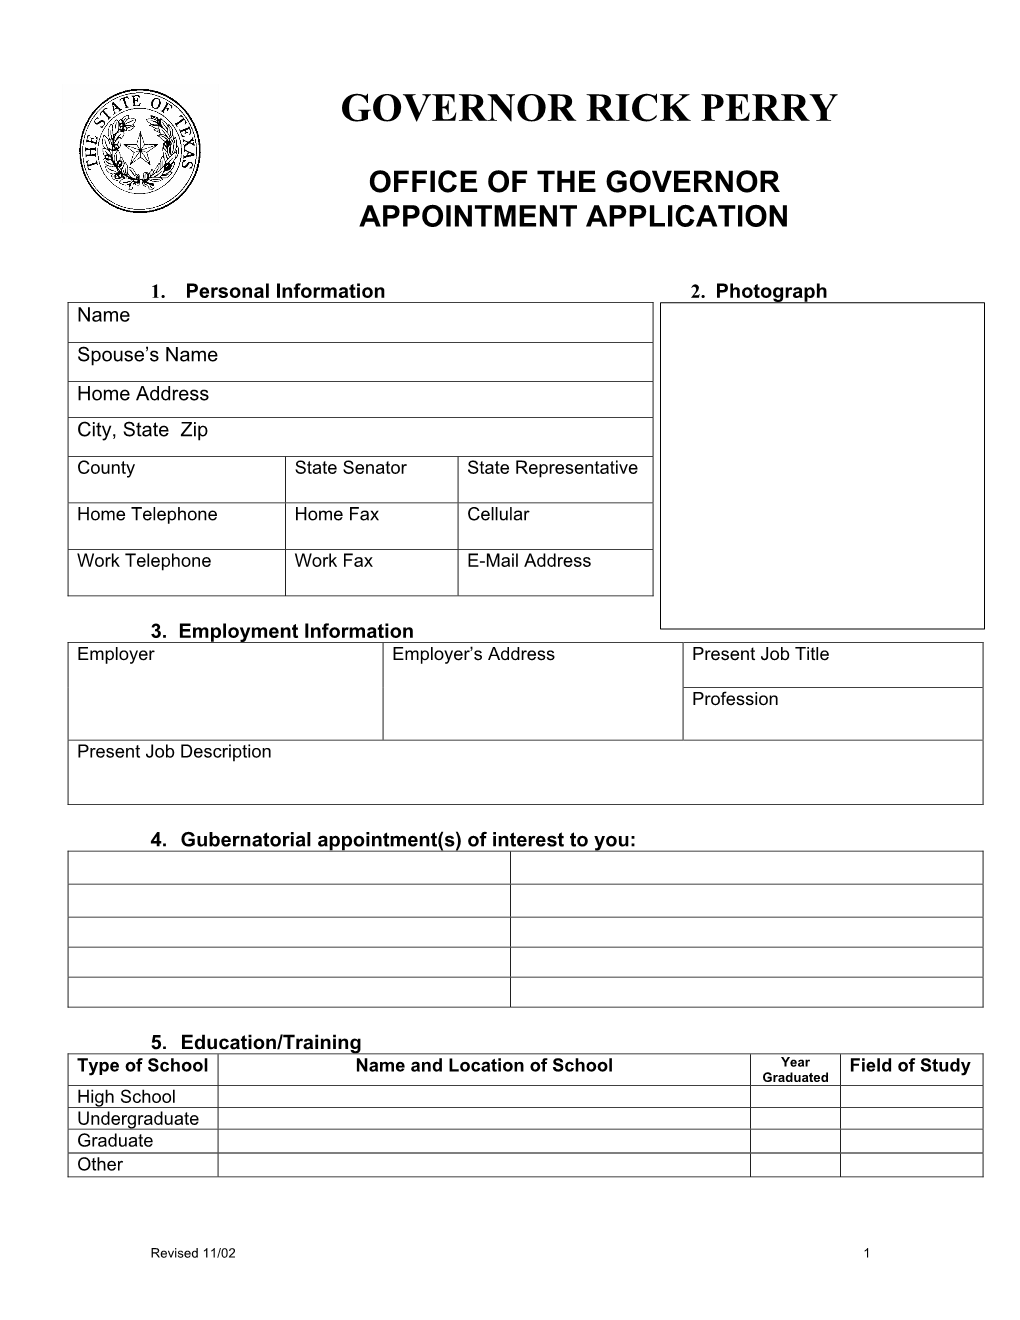 Office of the Governor Appointment Application